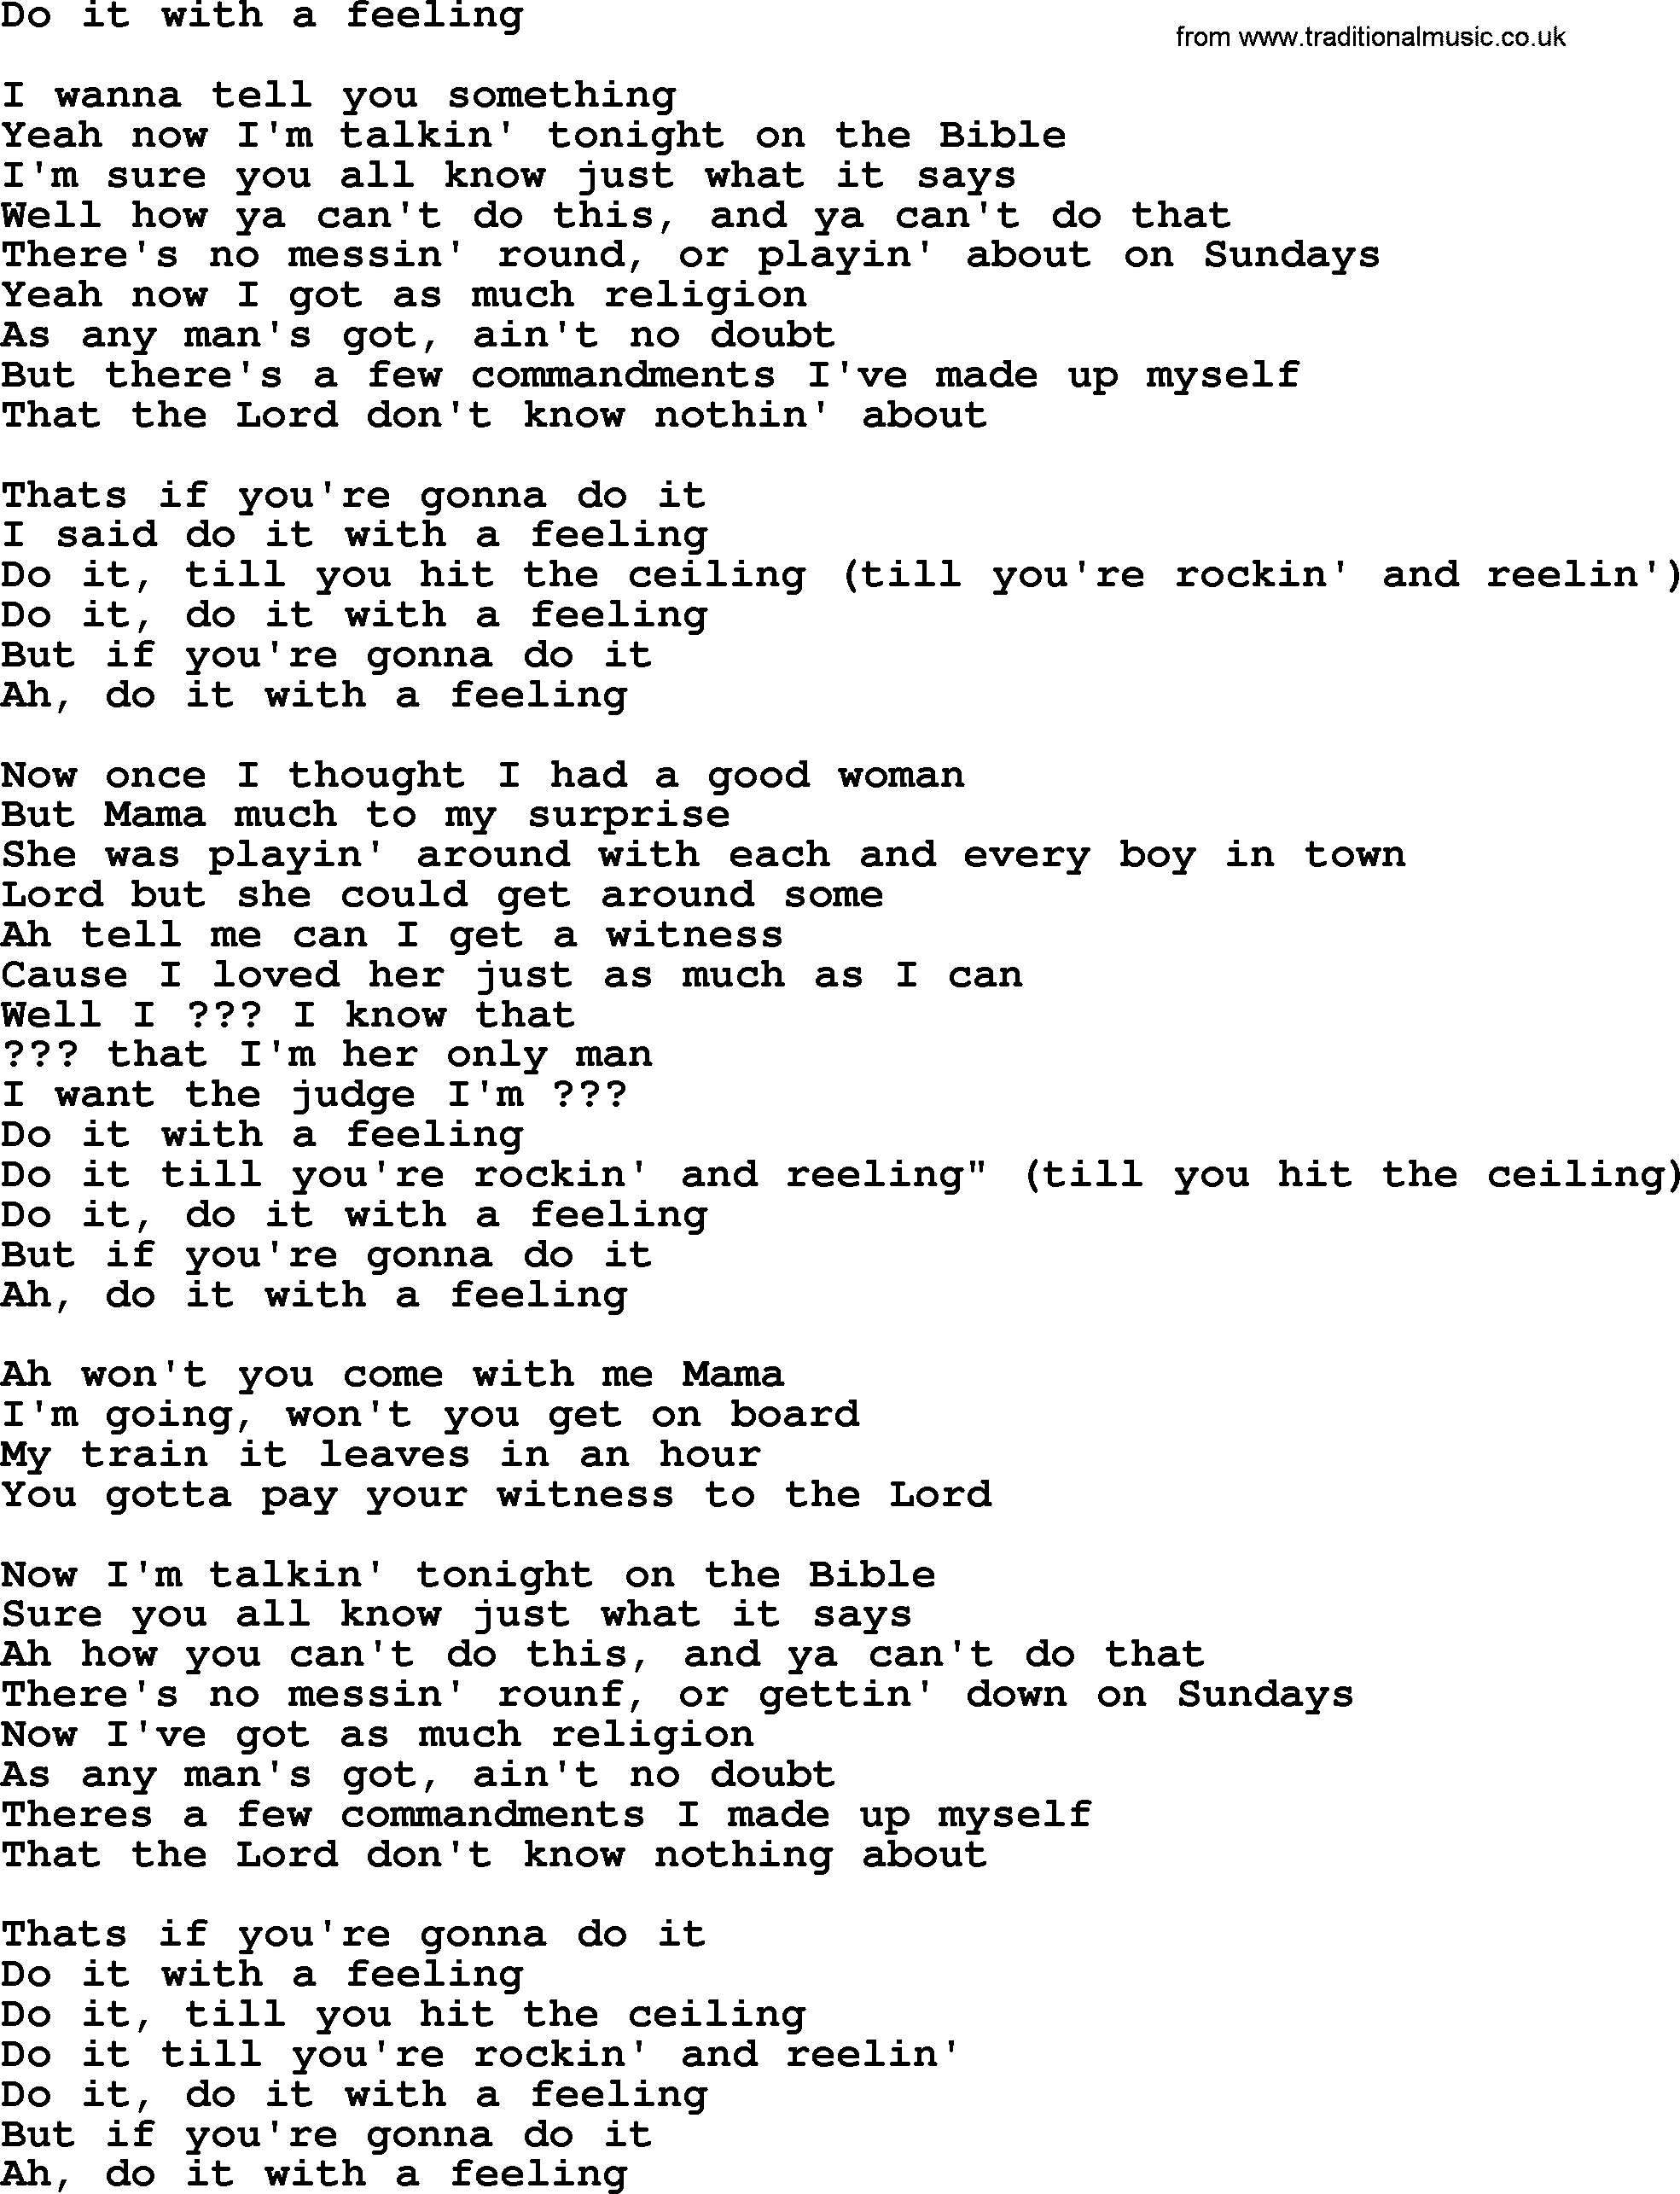 Bruce Springsteen song: Do It With A Feeling, lyrics